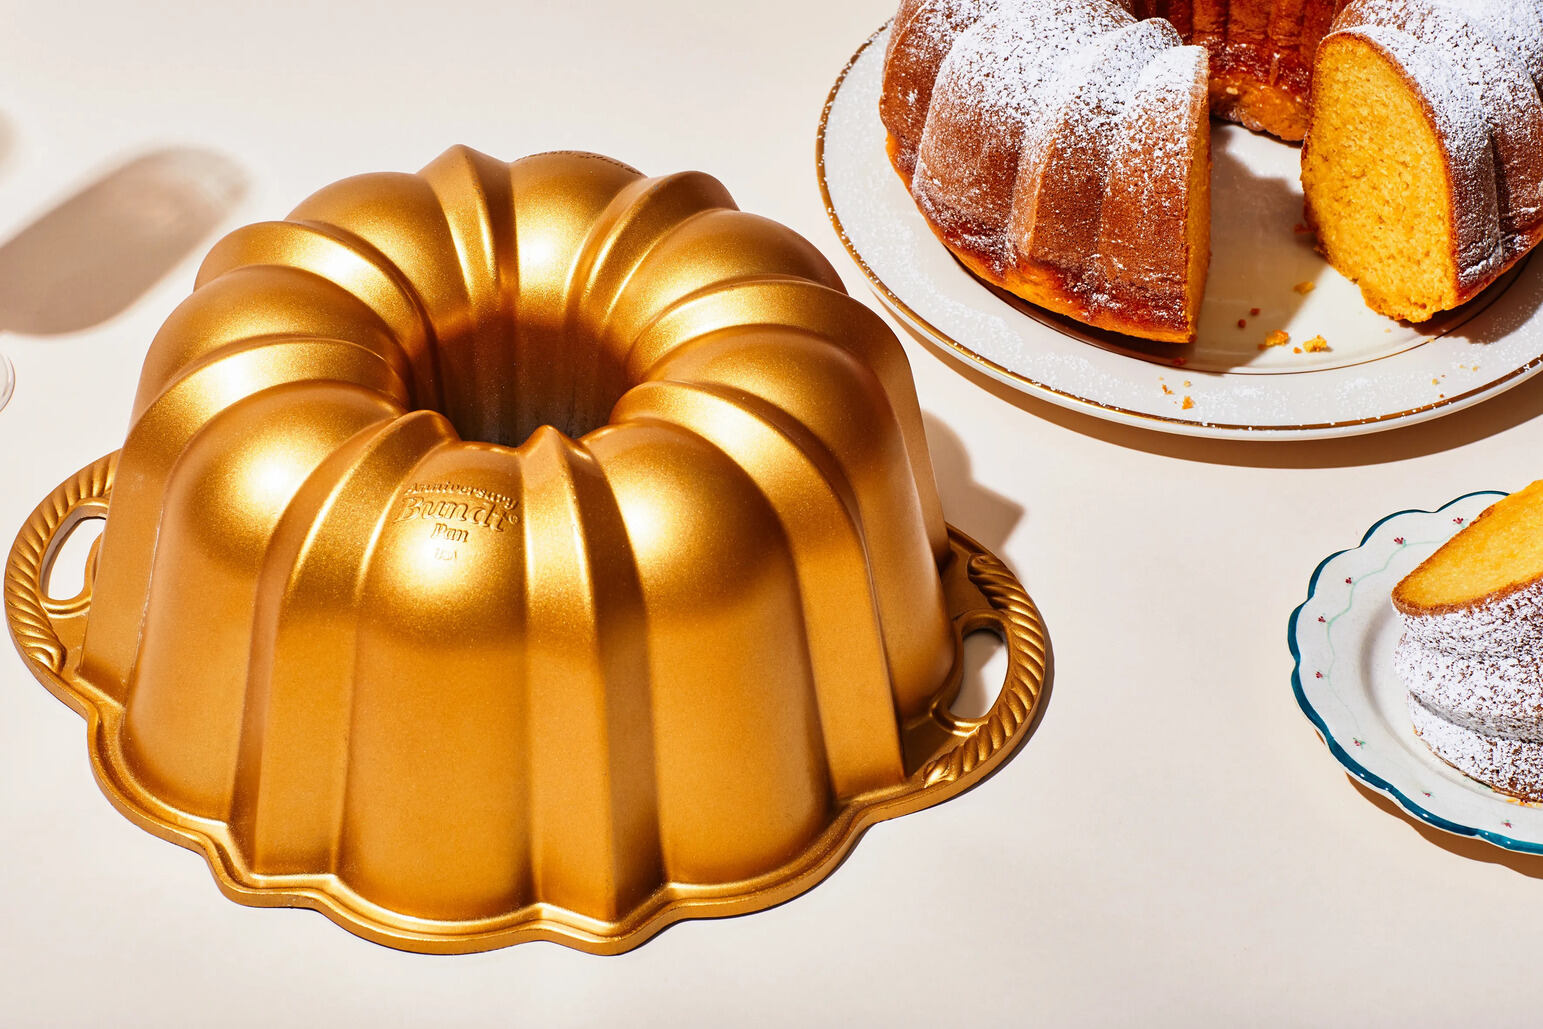 https://recipes.net/wp-content/uploads/2023/09/how-to-use-a-bundt-pan-1695445918.jpg